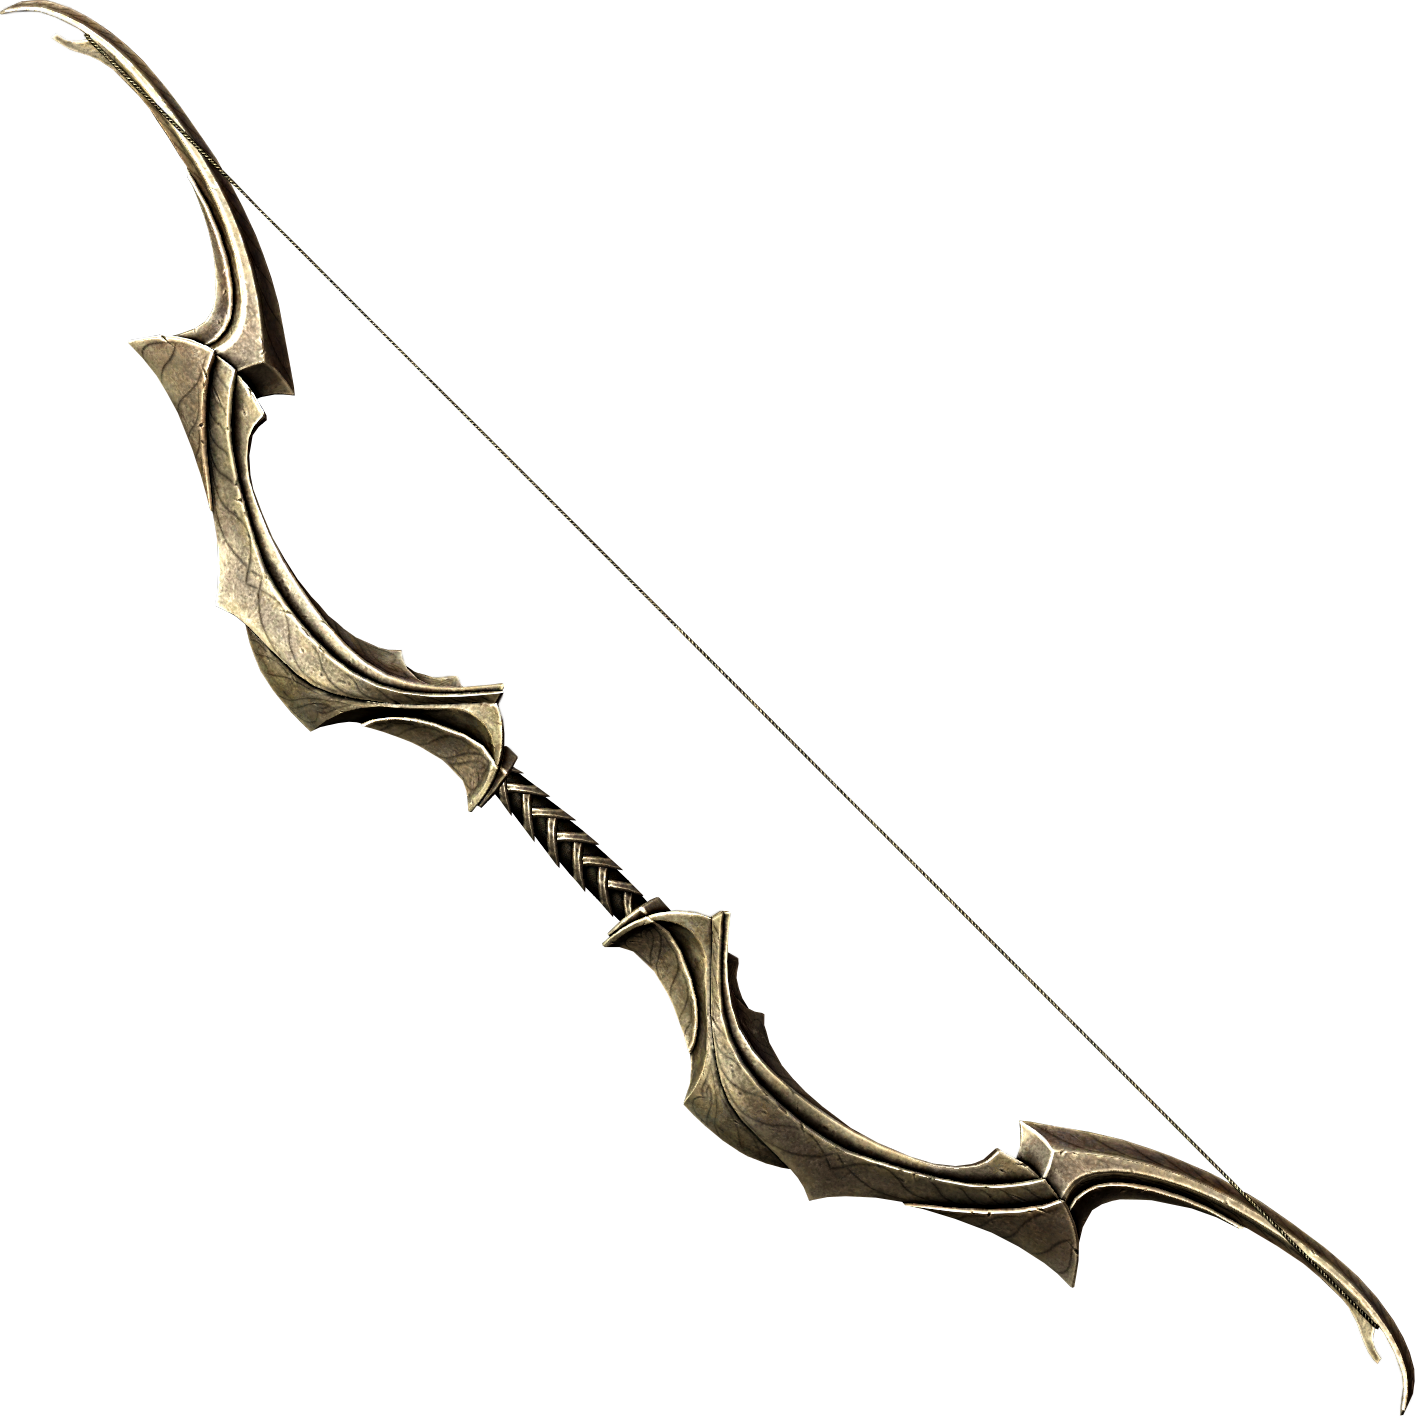 skyrim special edition real bows